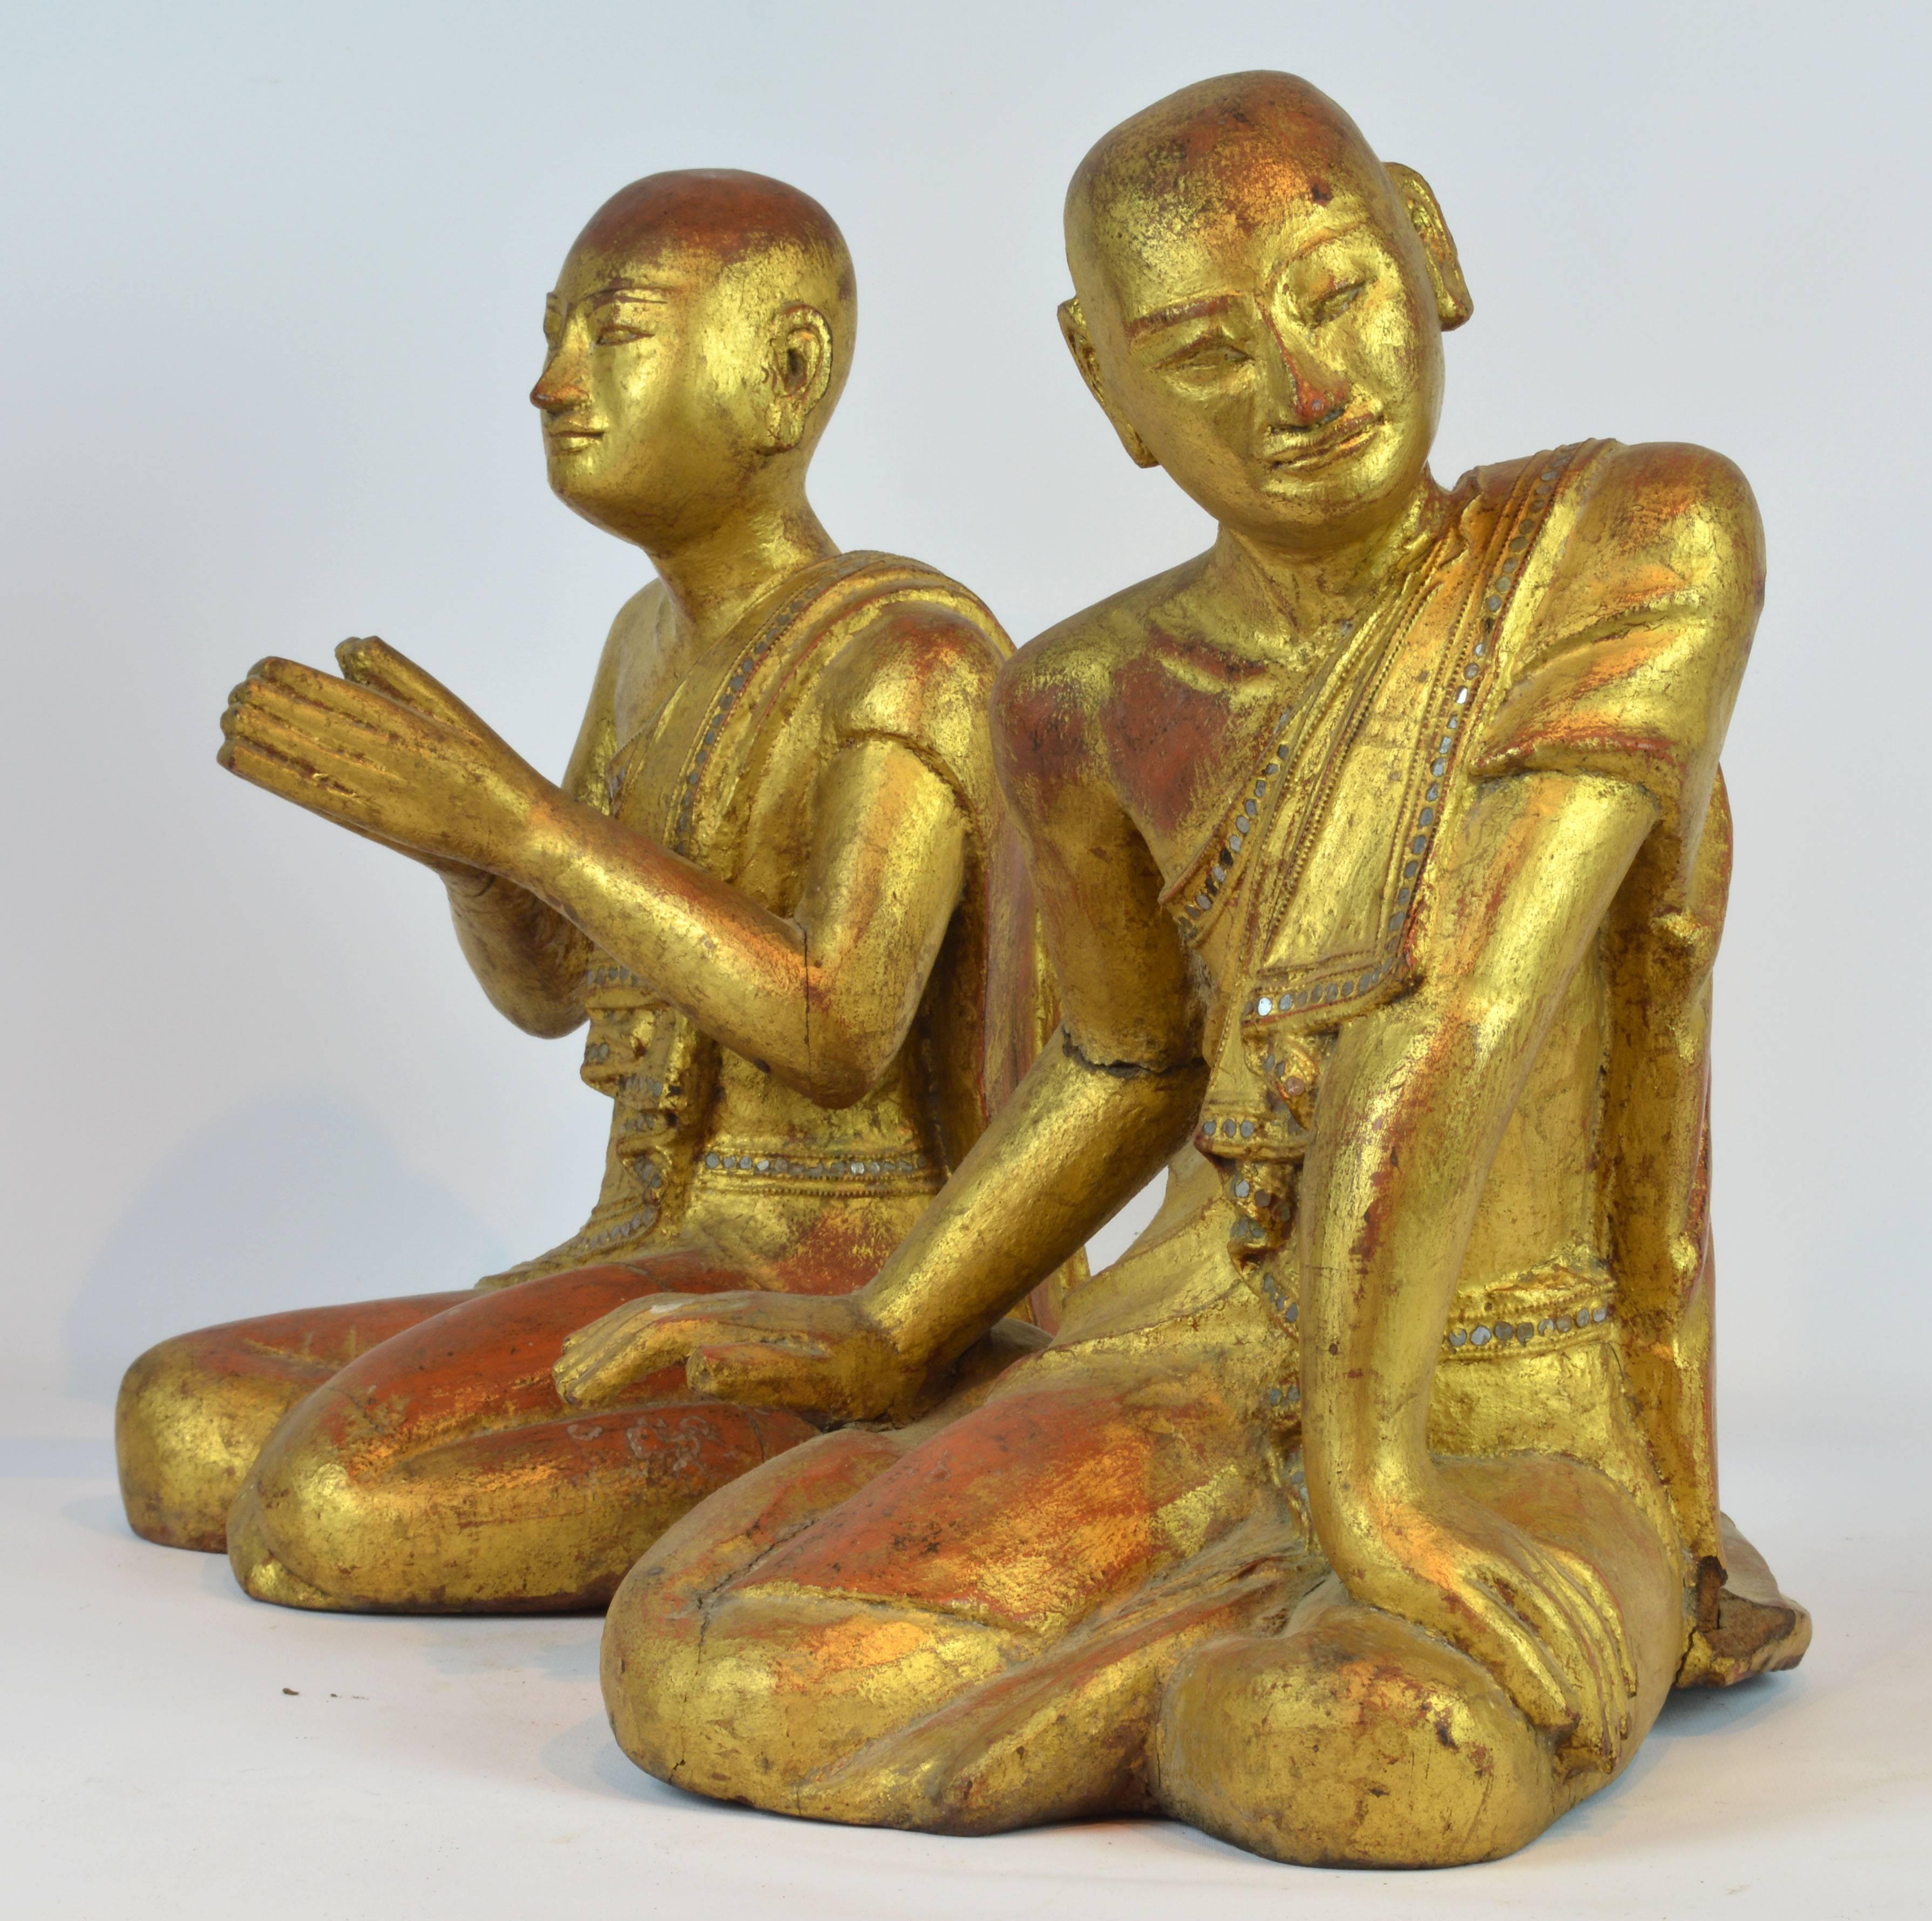 14 inches tall these two Thai or Burmese young monks are carved in wood and gilded. One monk is sitting in a praying position, the other with a relaxed but still devoted posture. The wear beautifully jeweled robes with inlay and intricate carved